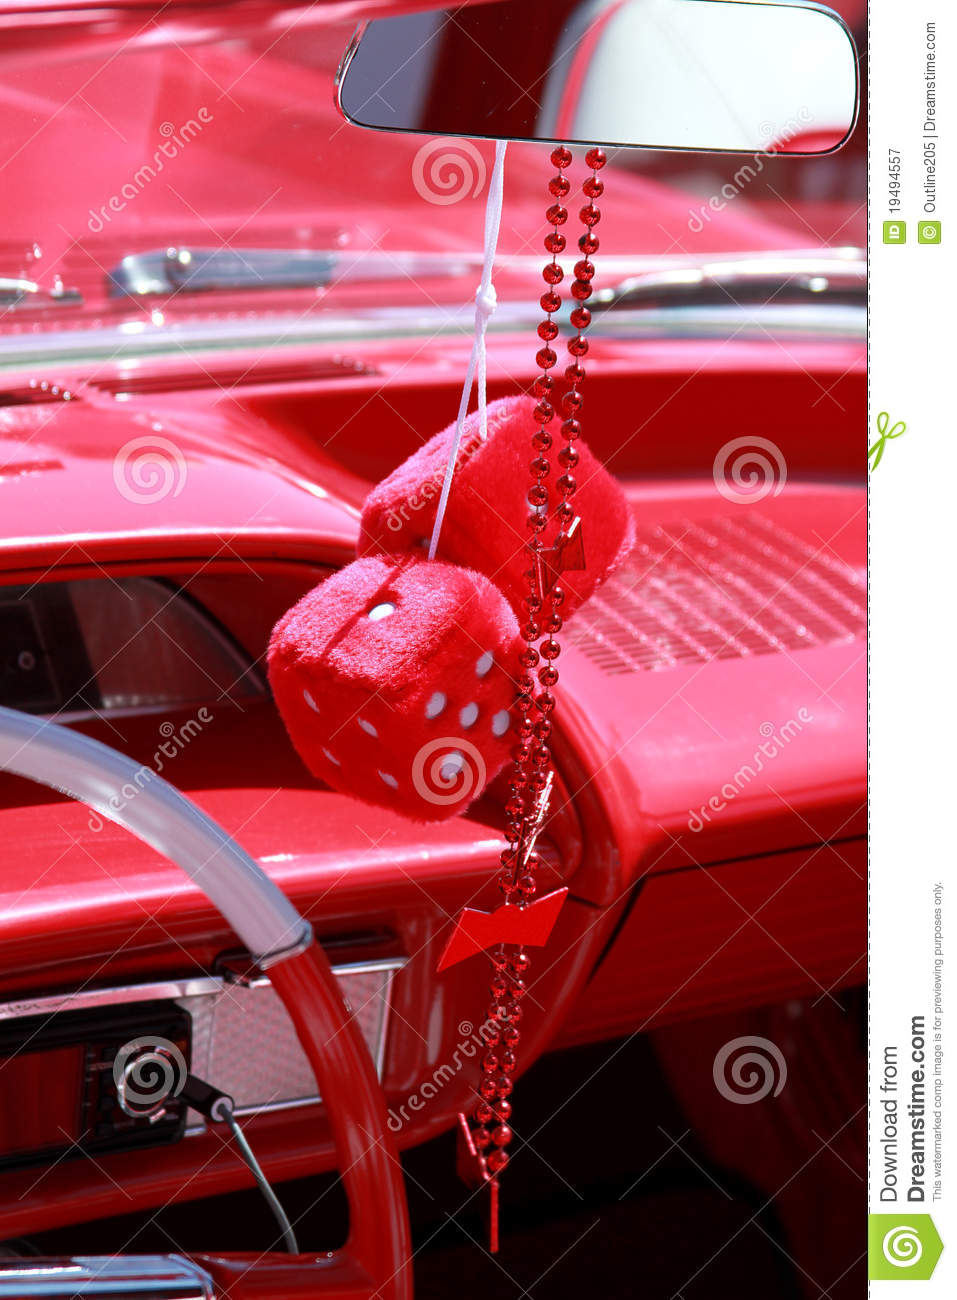 Fuzzy Dice Hanging From The Rearview Mirror Of A Classic Red Car